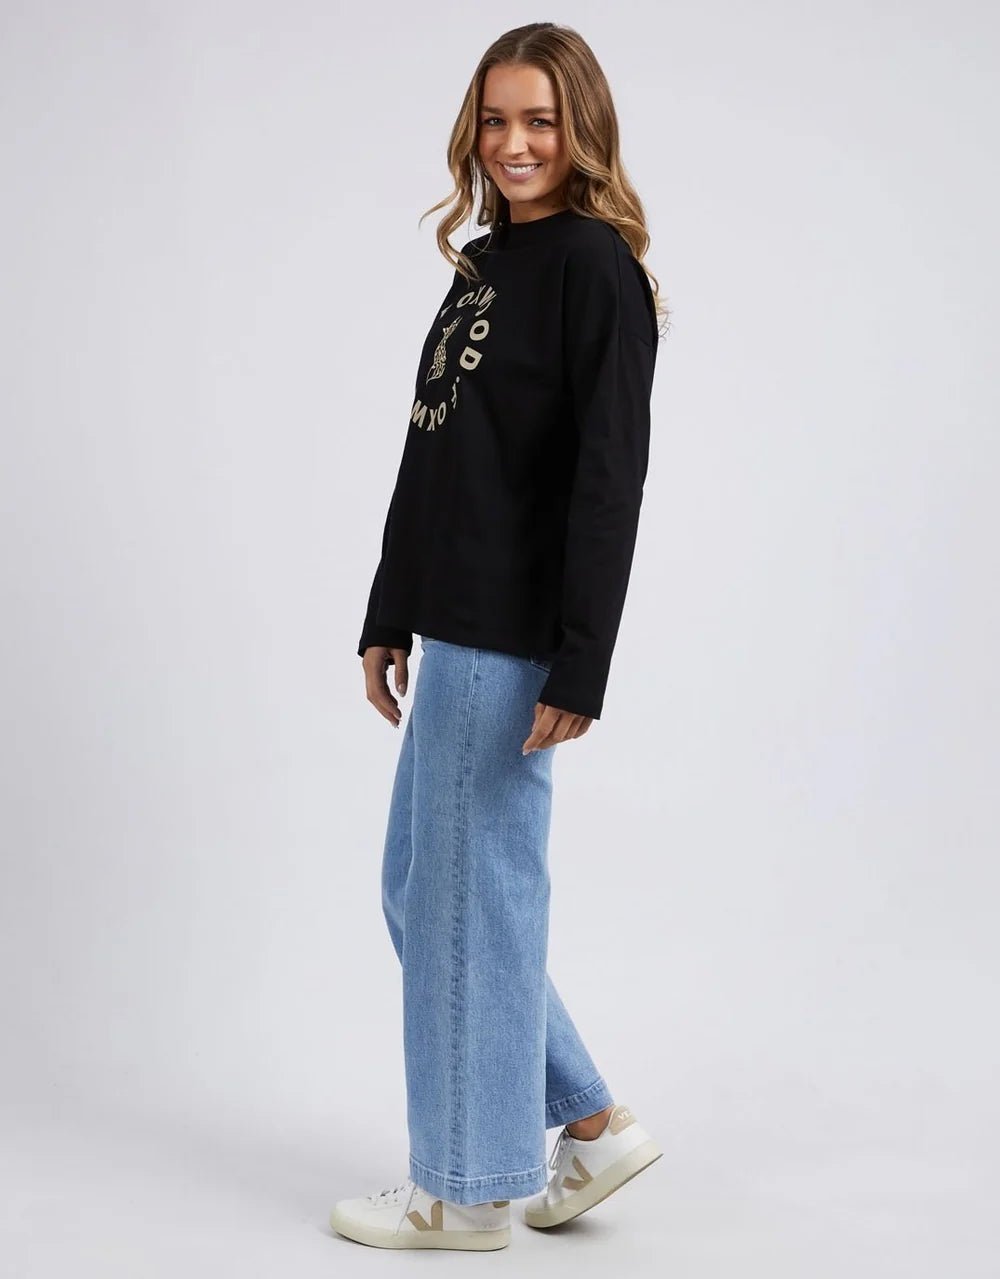 FOXWOOD_STATEMENT LONG SLEEVE TOP _ STATEMENT LONG SLEEVE TOP _ Ebony Boutique NZ